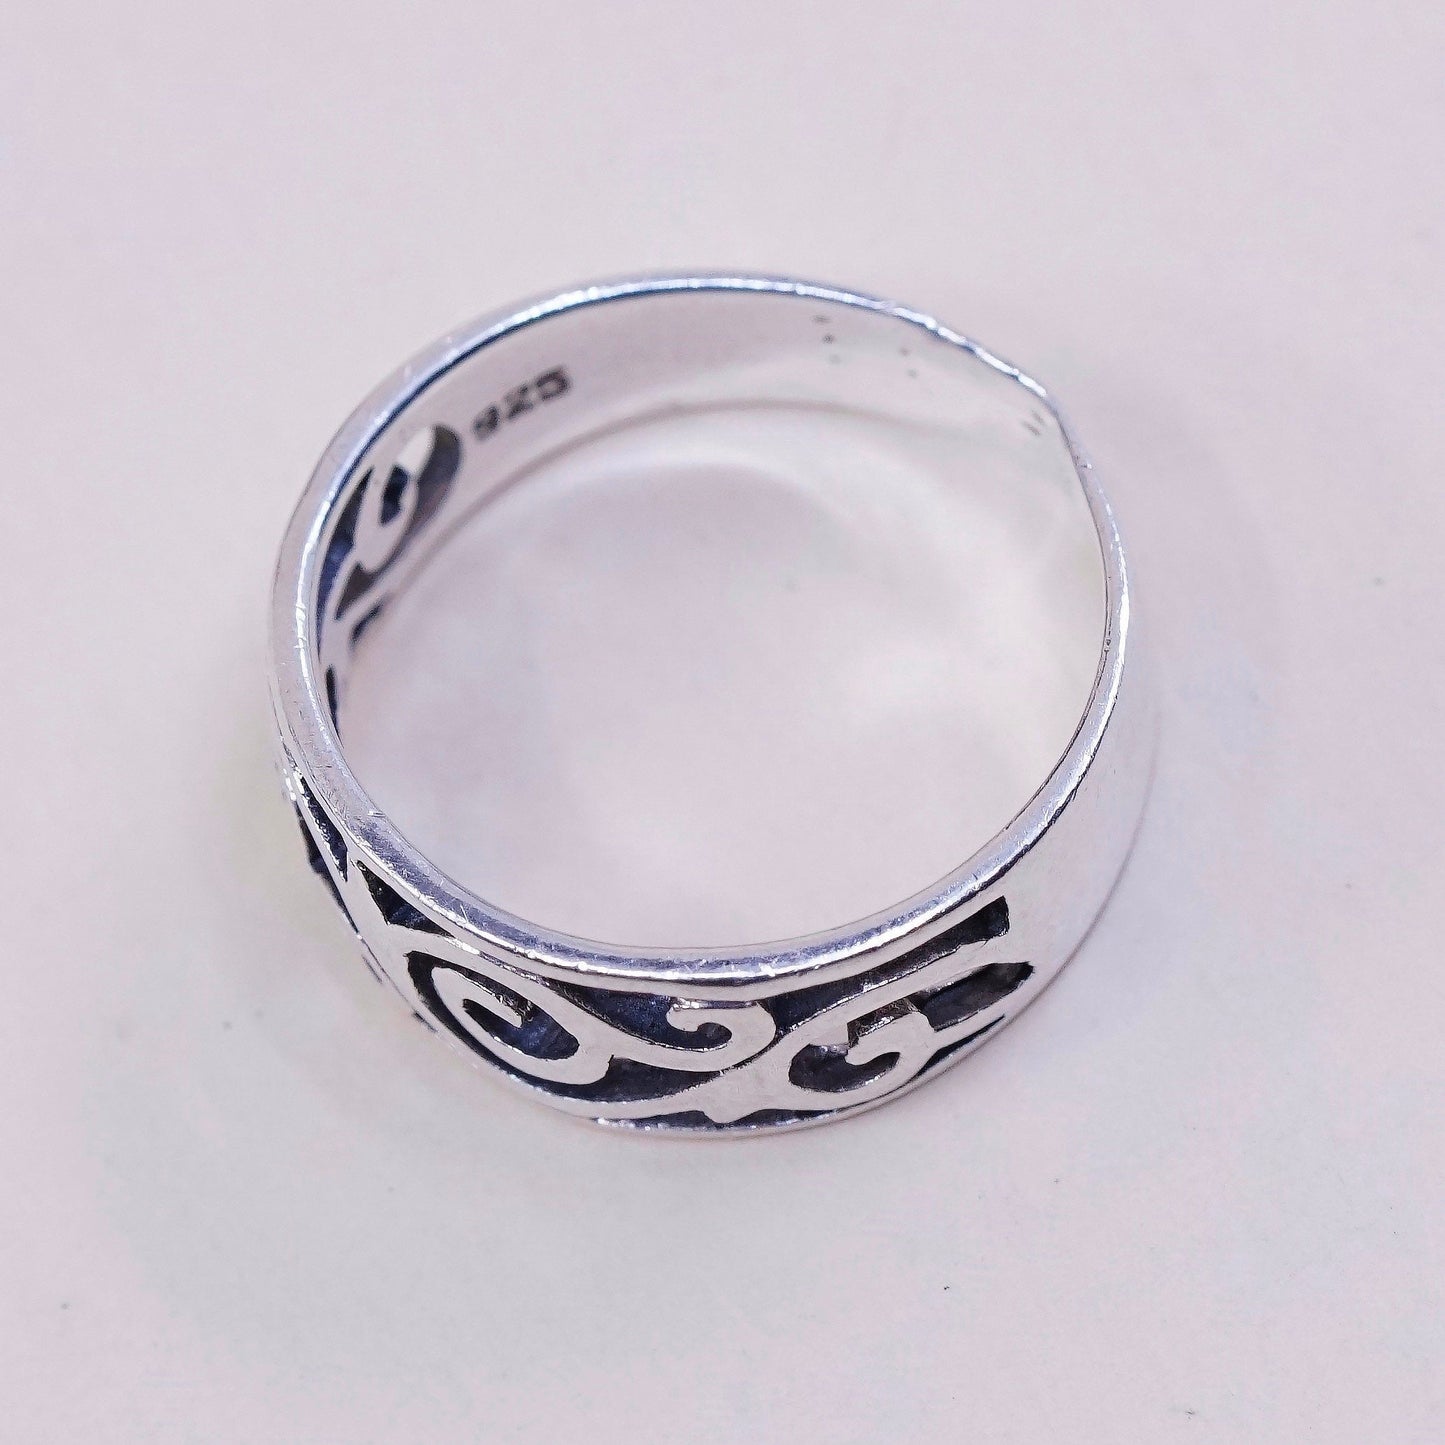 sz 6, vtg Sterling silver handmade ring, mexico 925 band w/ swirl wave